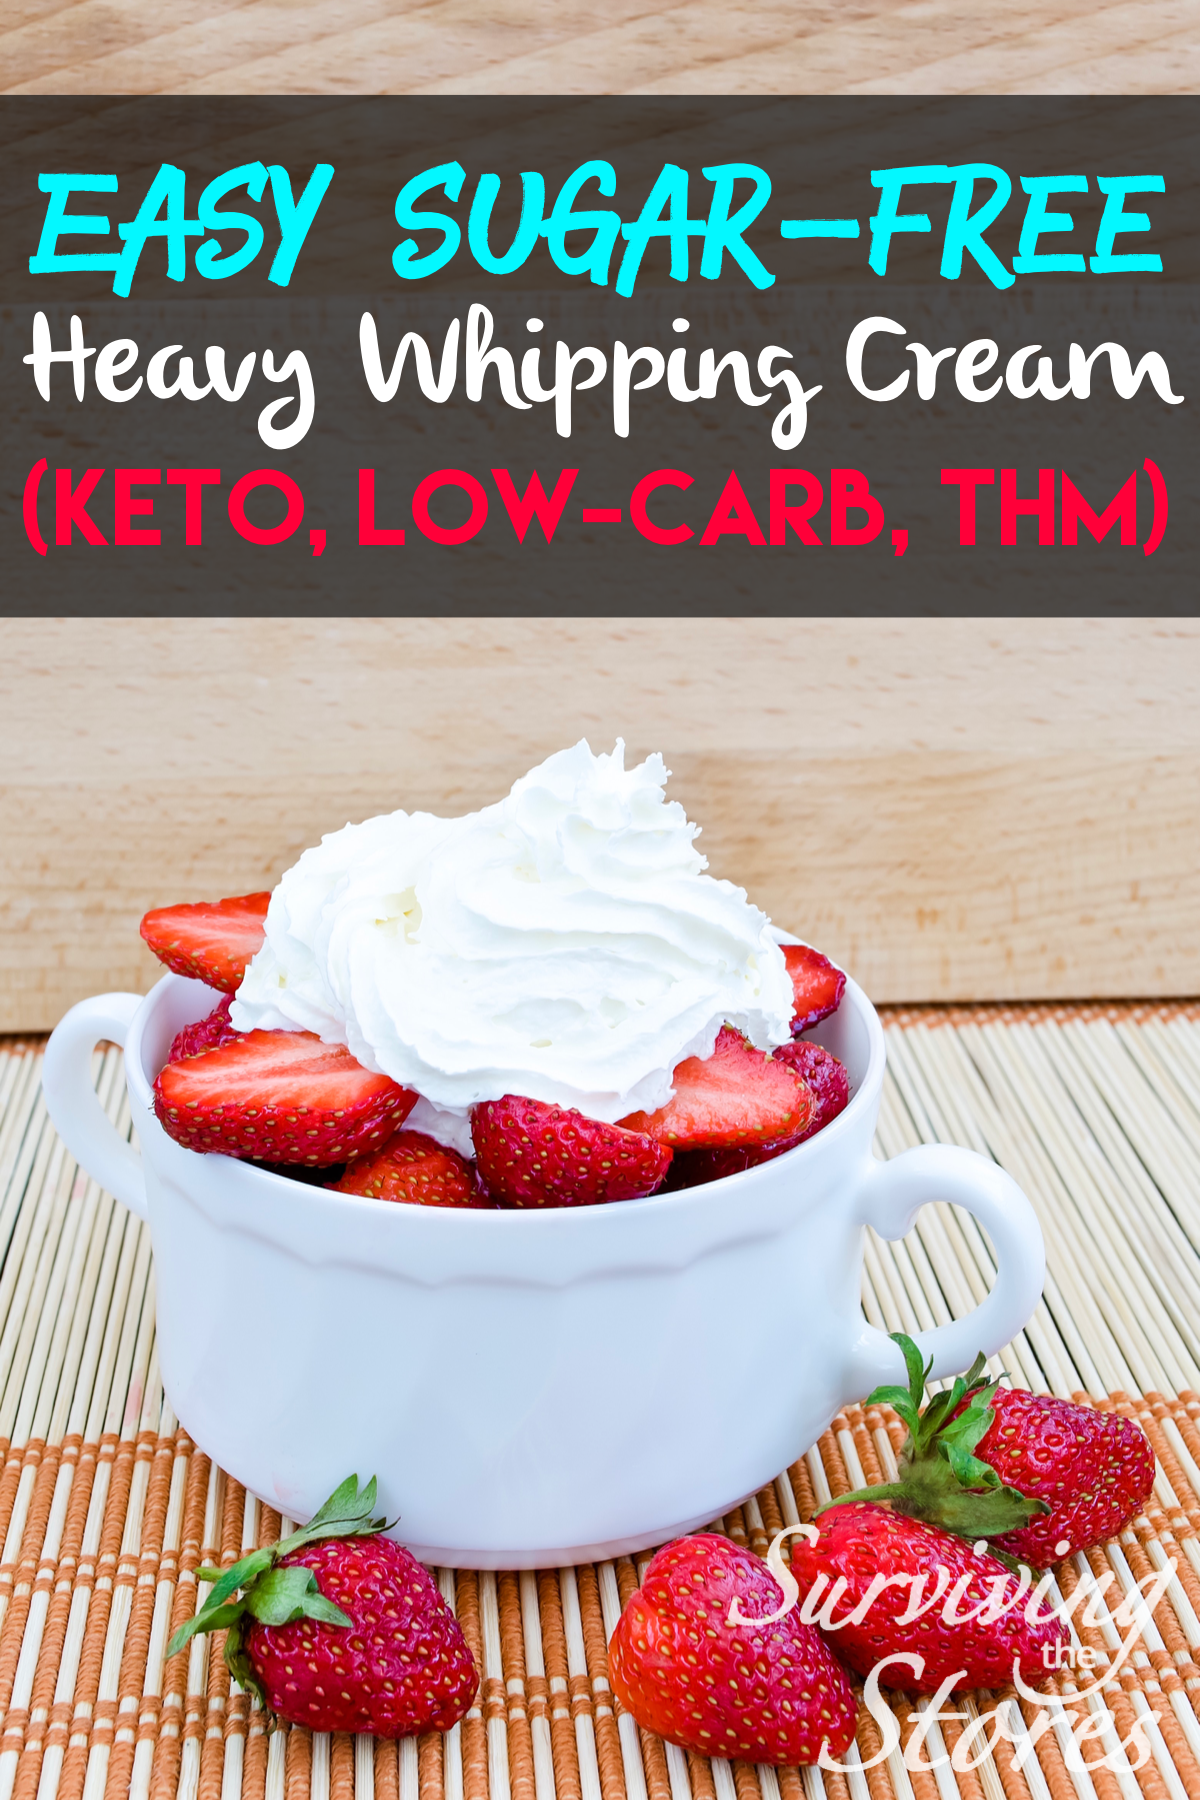 Super easy keto, low-carb, THM-S whipped cream!